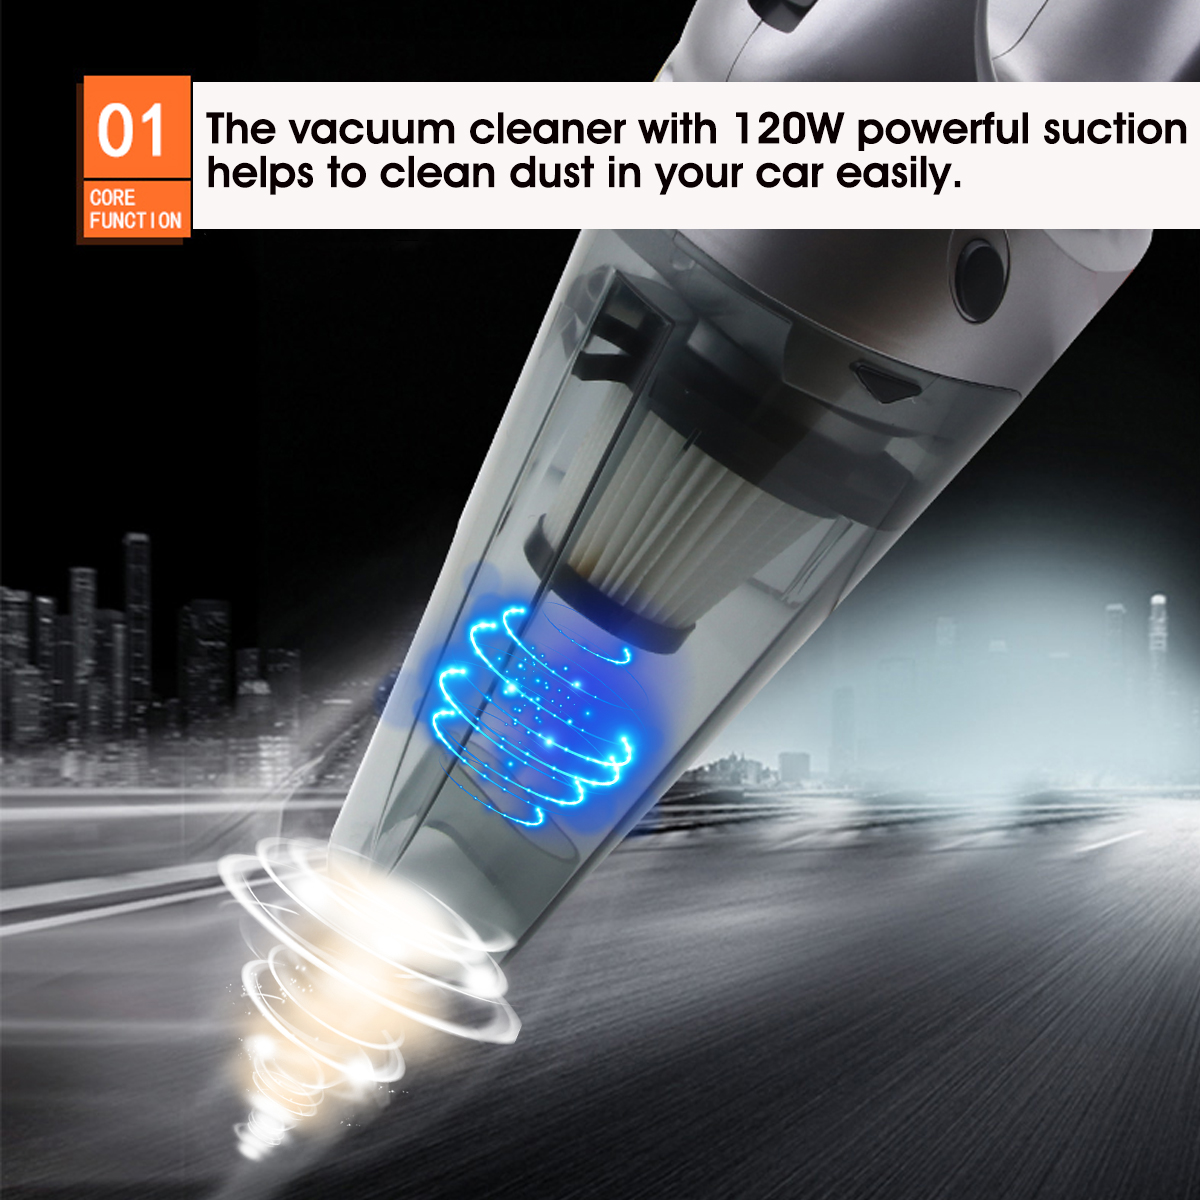 120W-Portable-Auto-Car-Handheld-Vacuum-Cleaner-Duster-Wet--Dry-Dirt-Suction-with-LED-Light-1624459-2